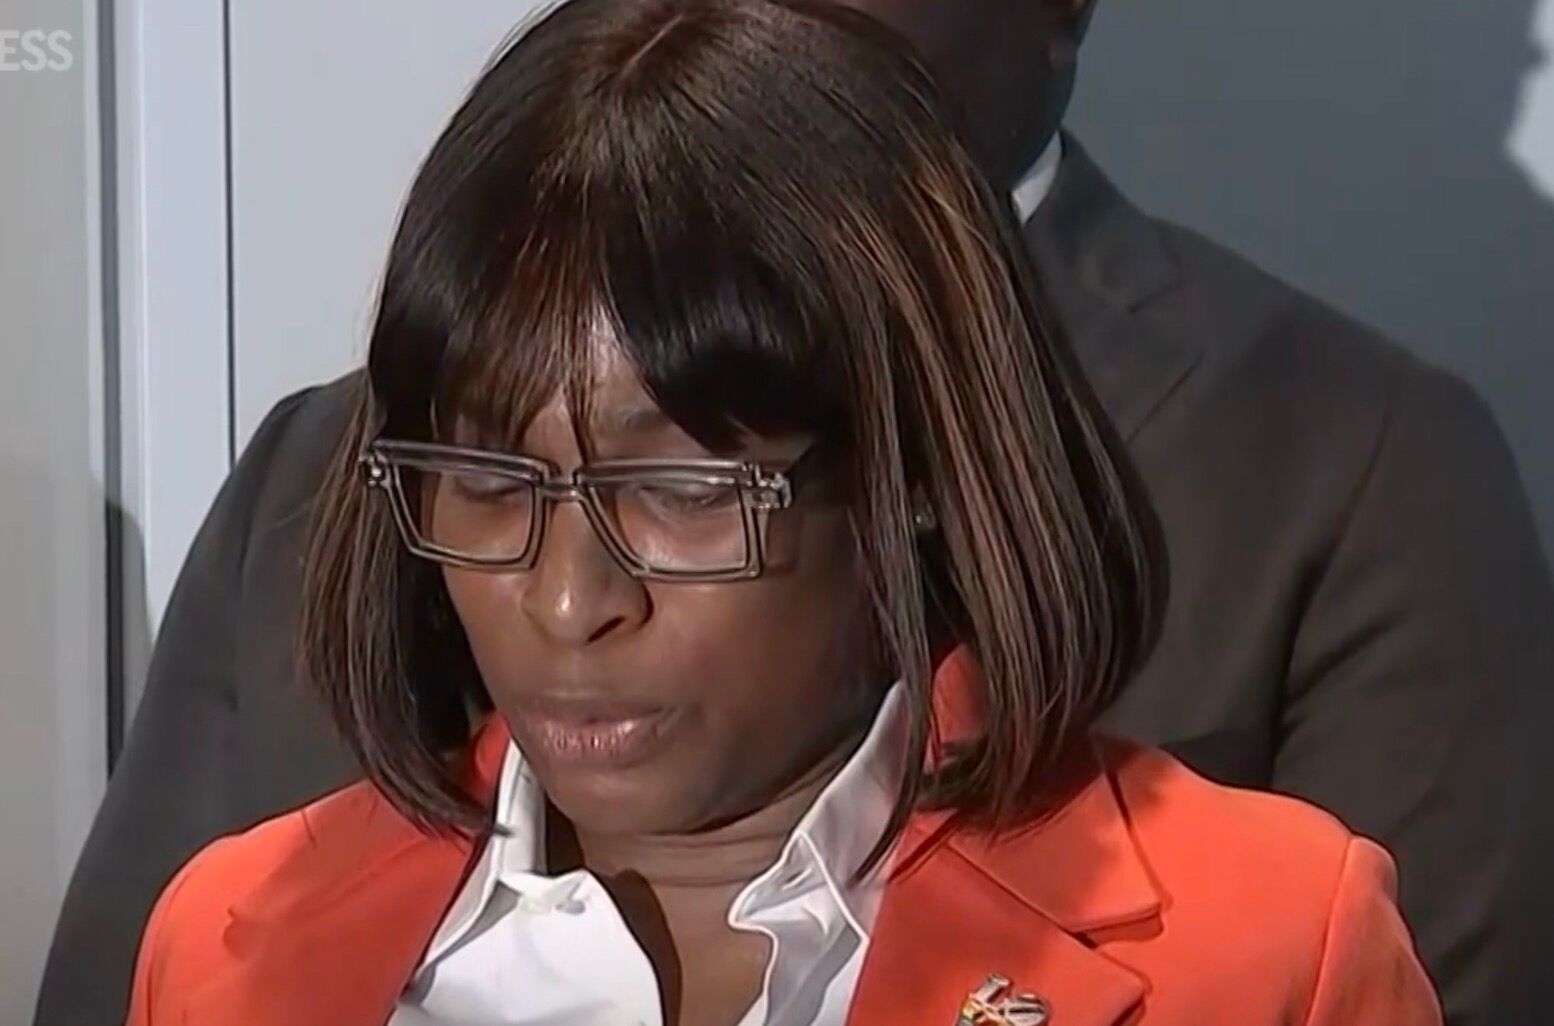 Celena Morrison-McLean speaks at a press conference after being arrested by a state trooper